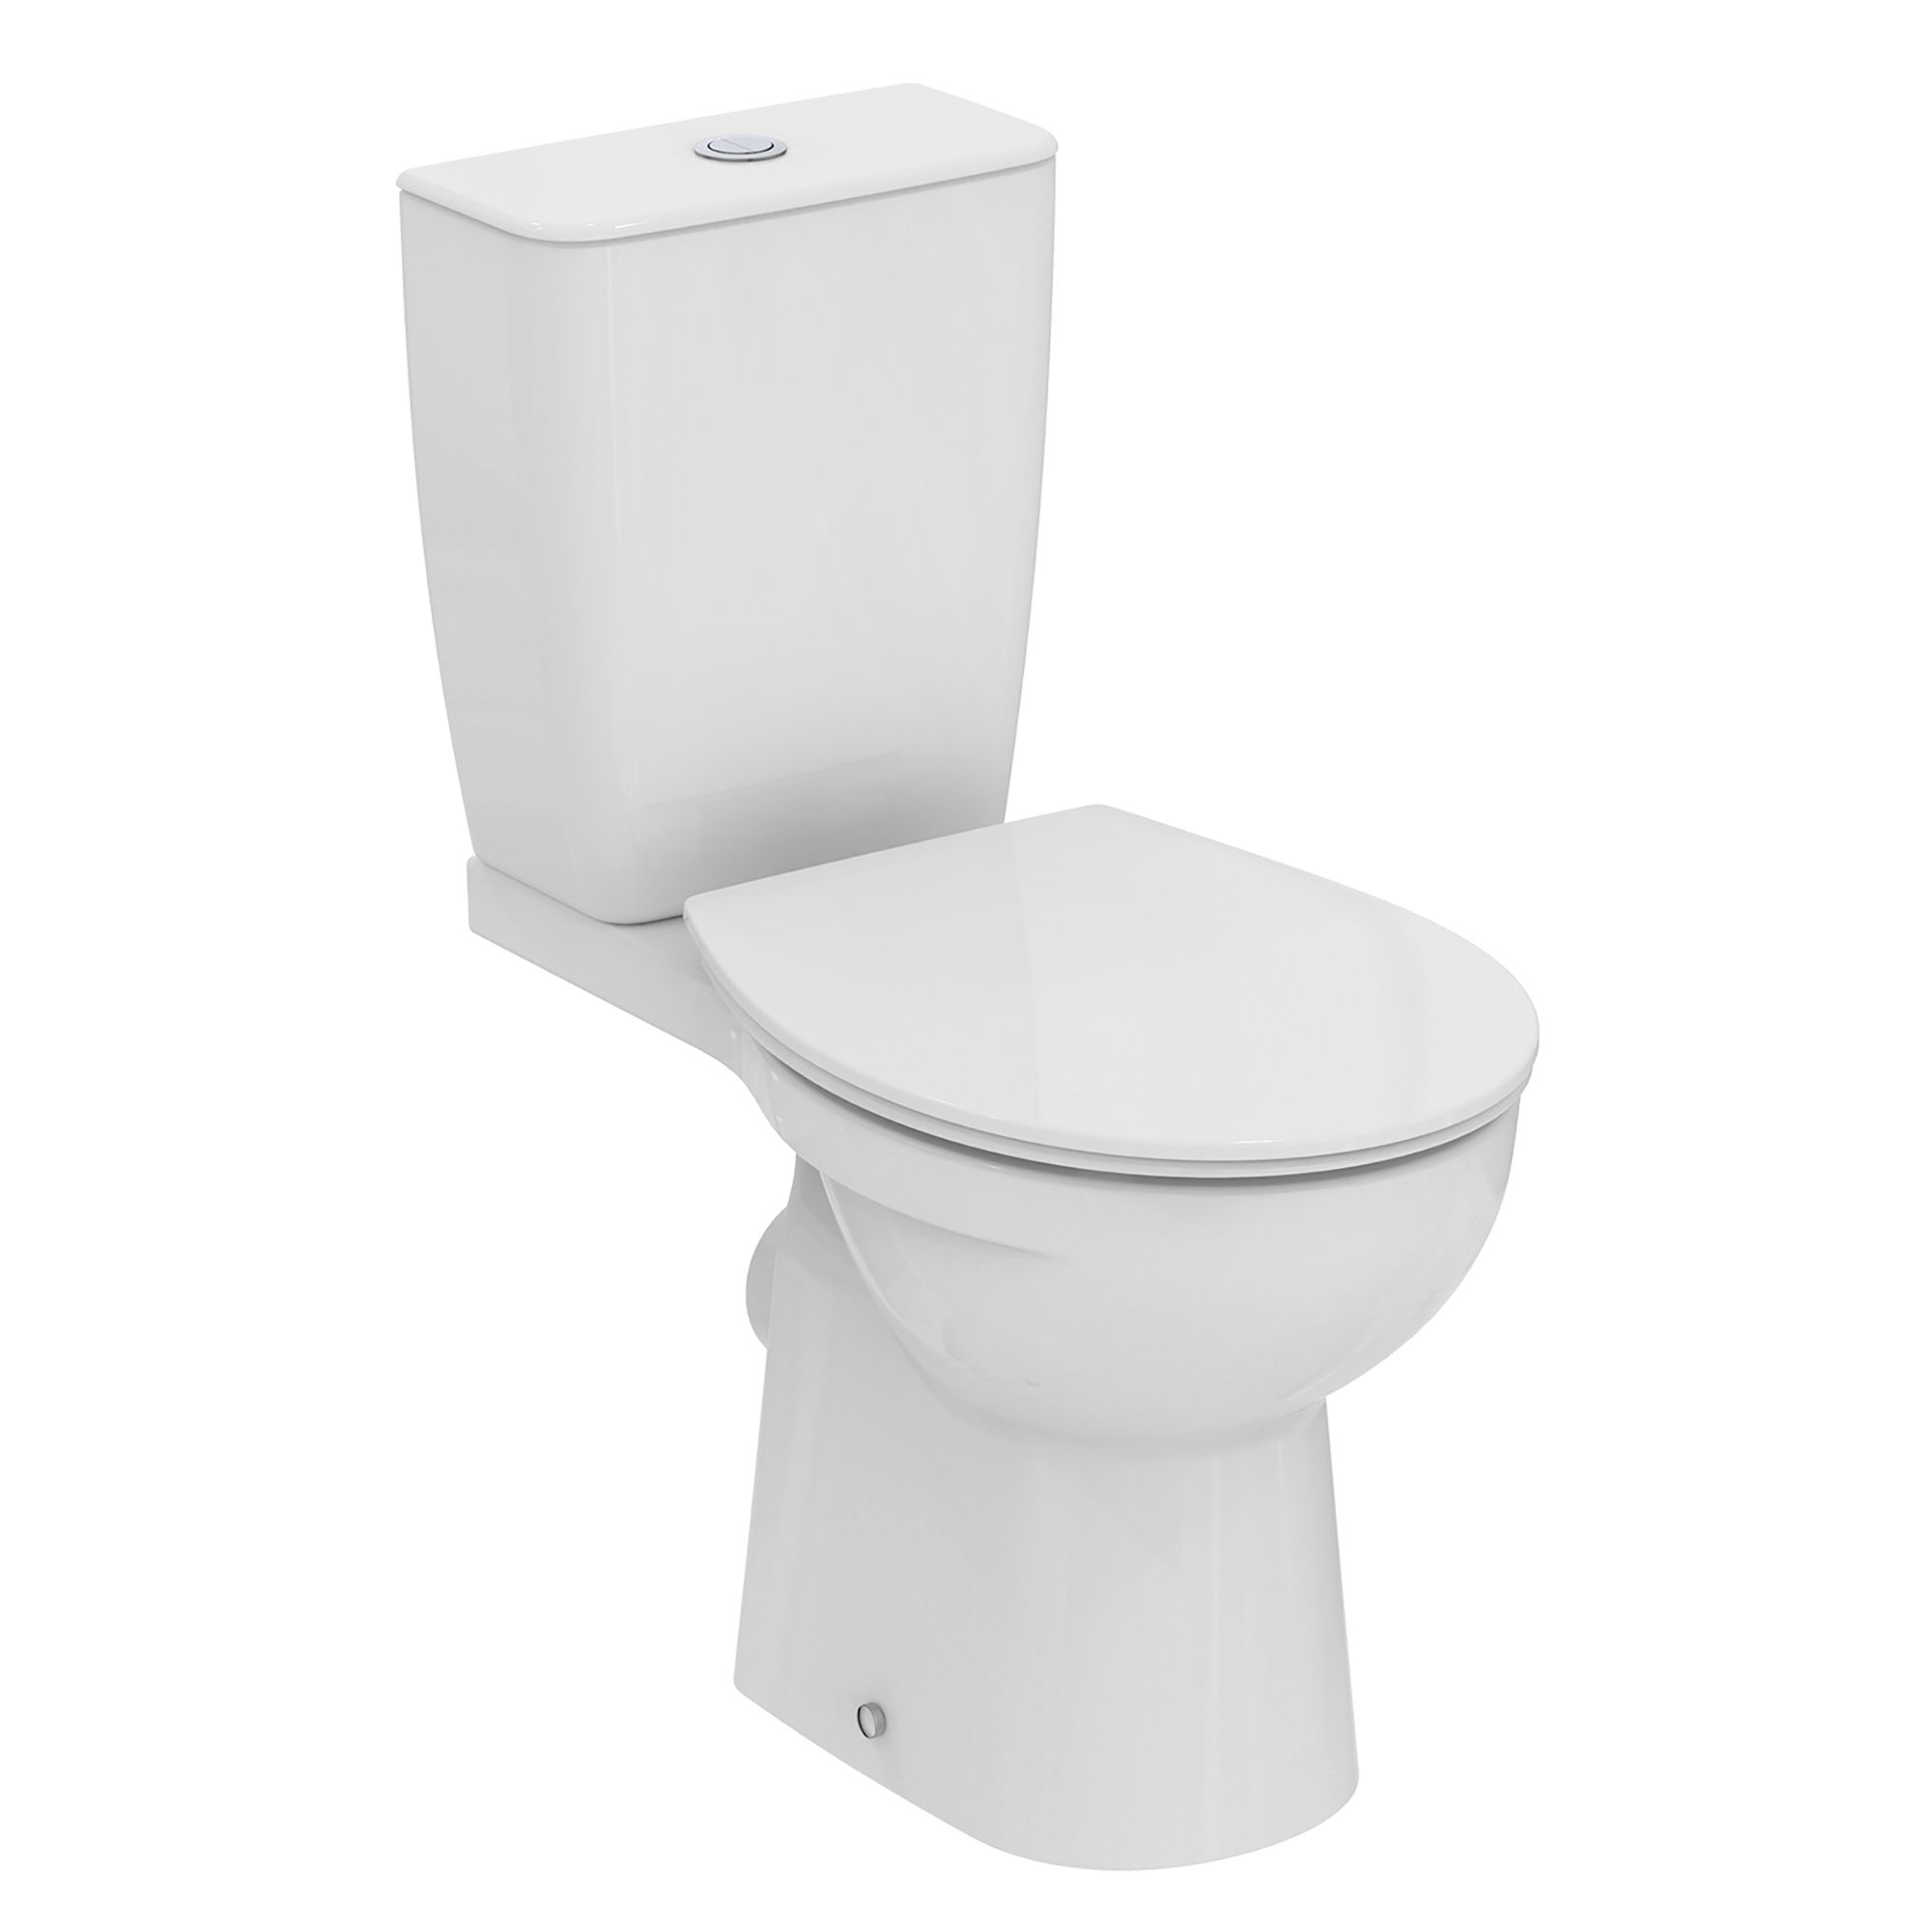 Ideal Standard Tirso White Standard Open back close-coupled Round